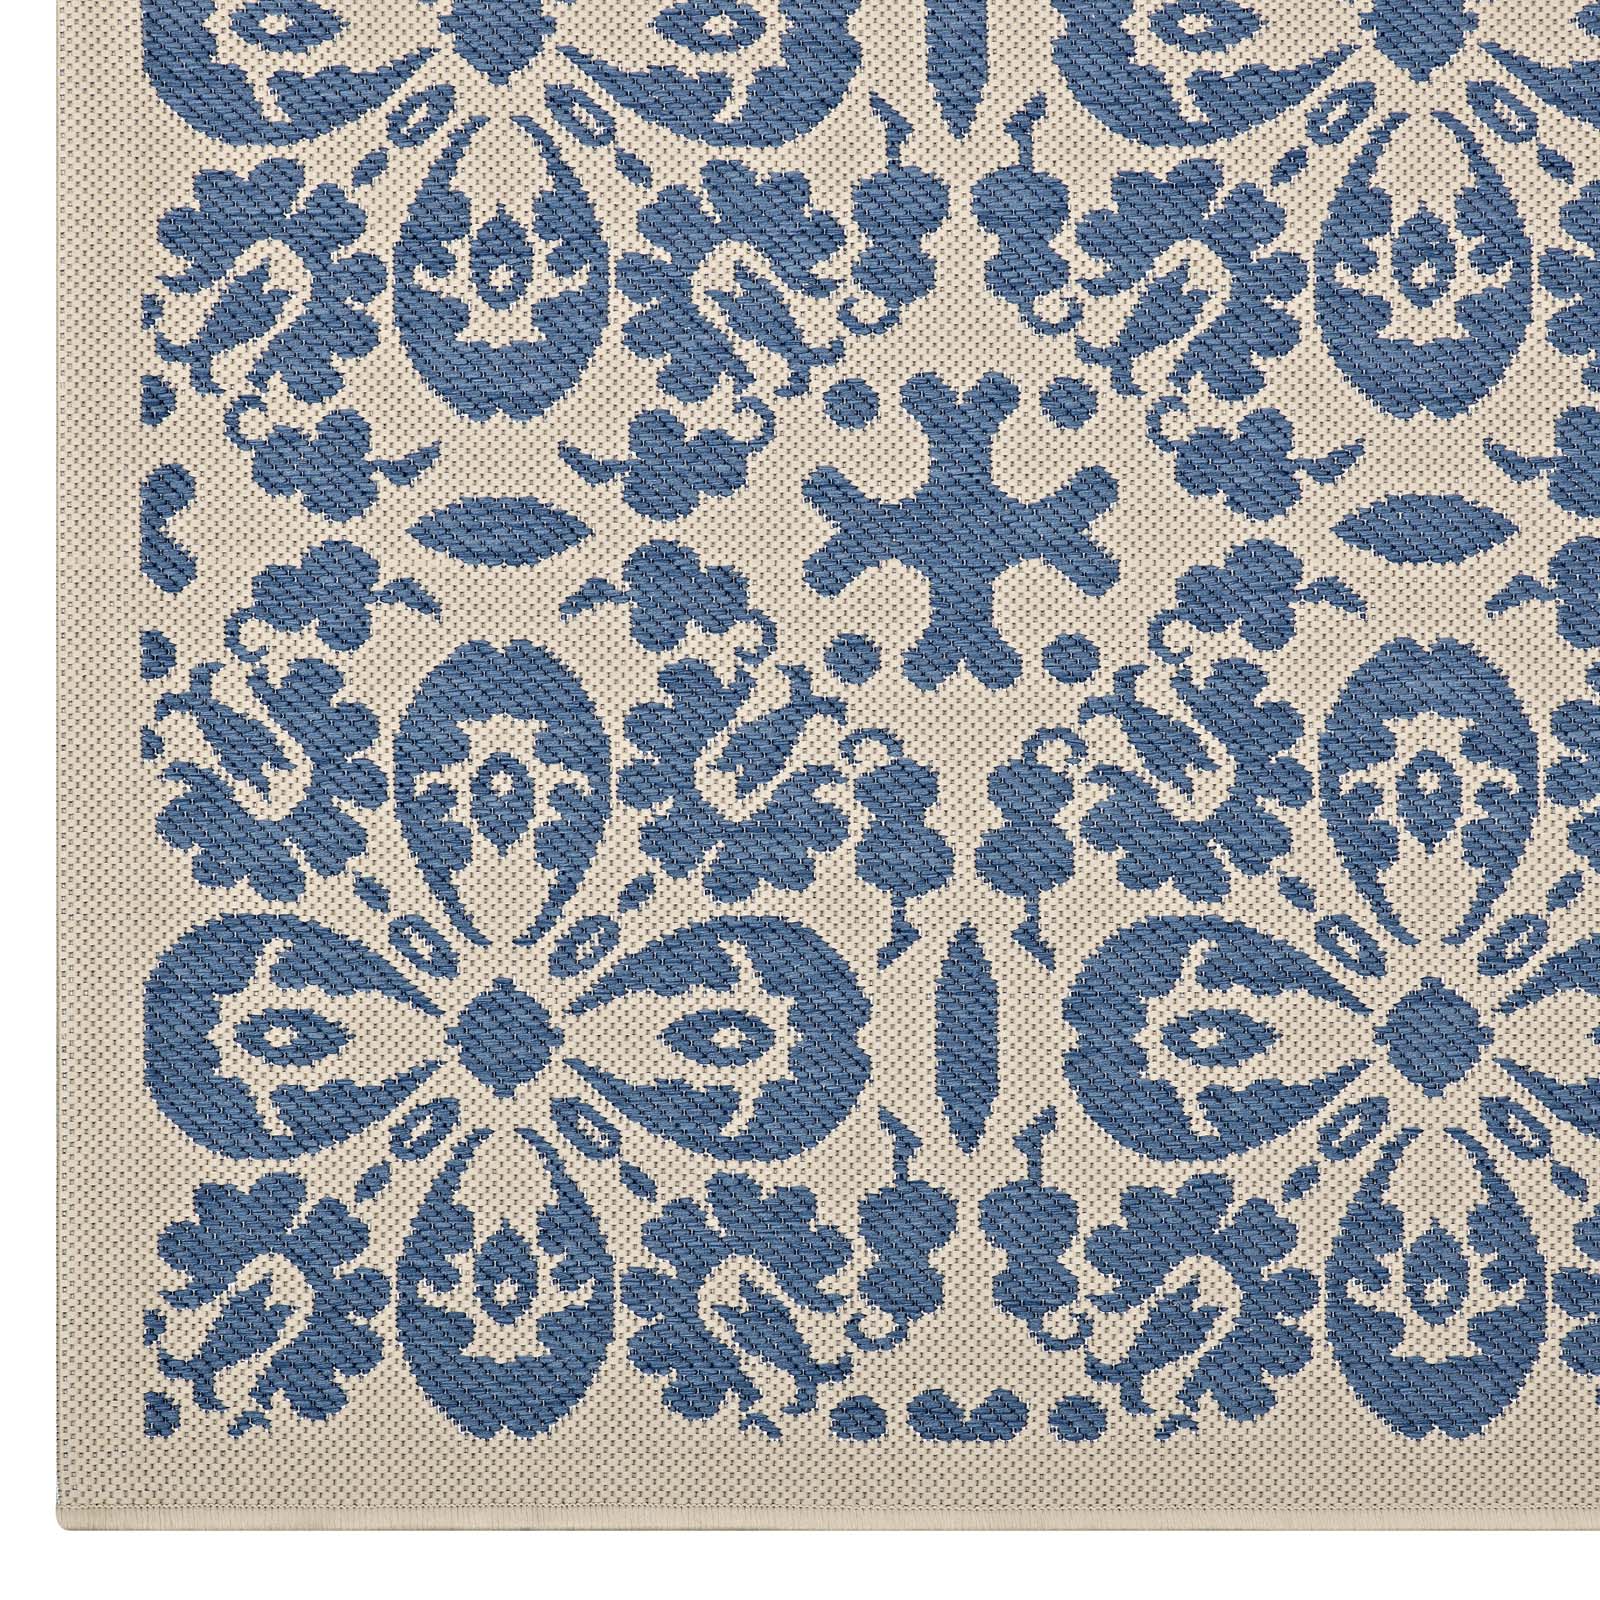 Modway Outdoor Rugs - Ariana Vintage Floral Trellis 9'x12' Outdoor Area Rug Blue & Beige